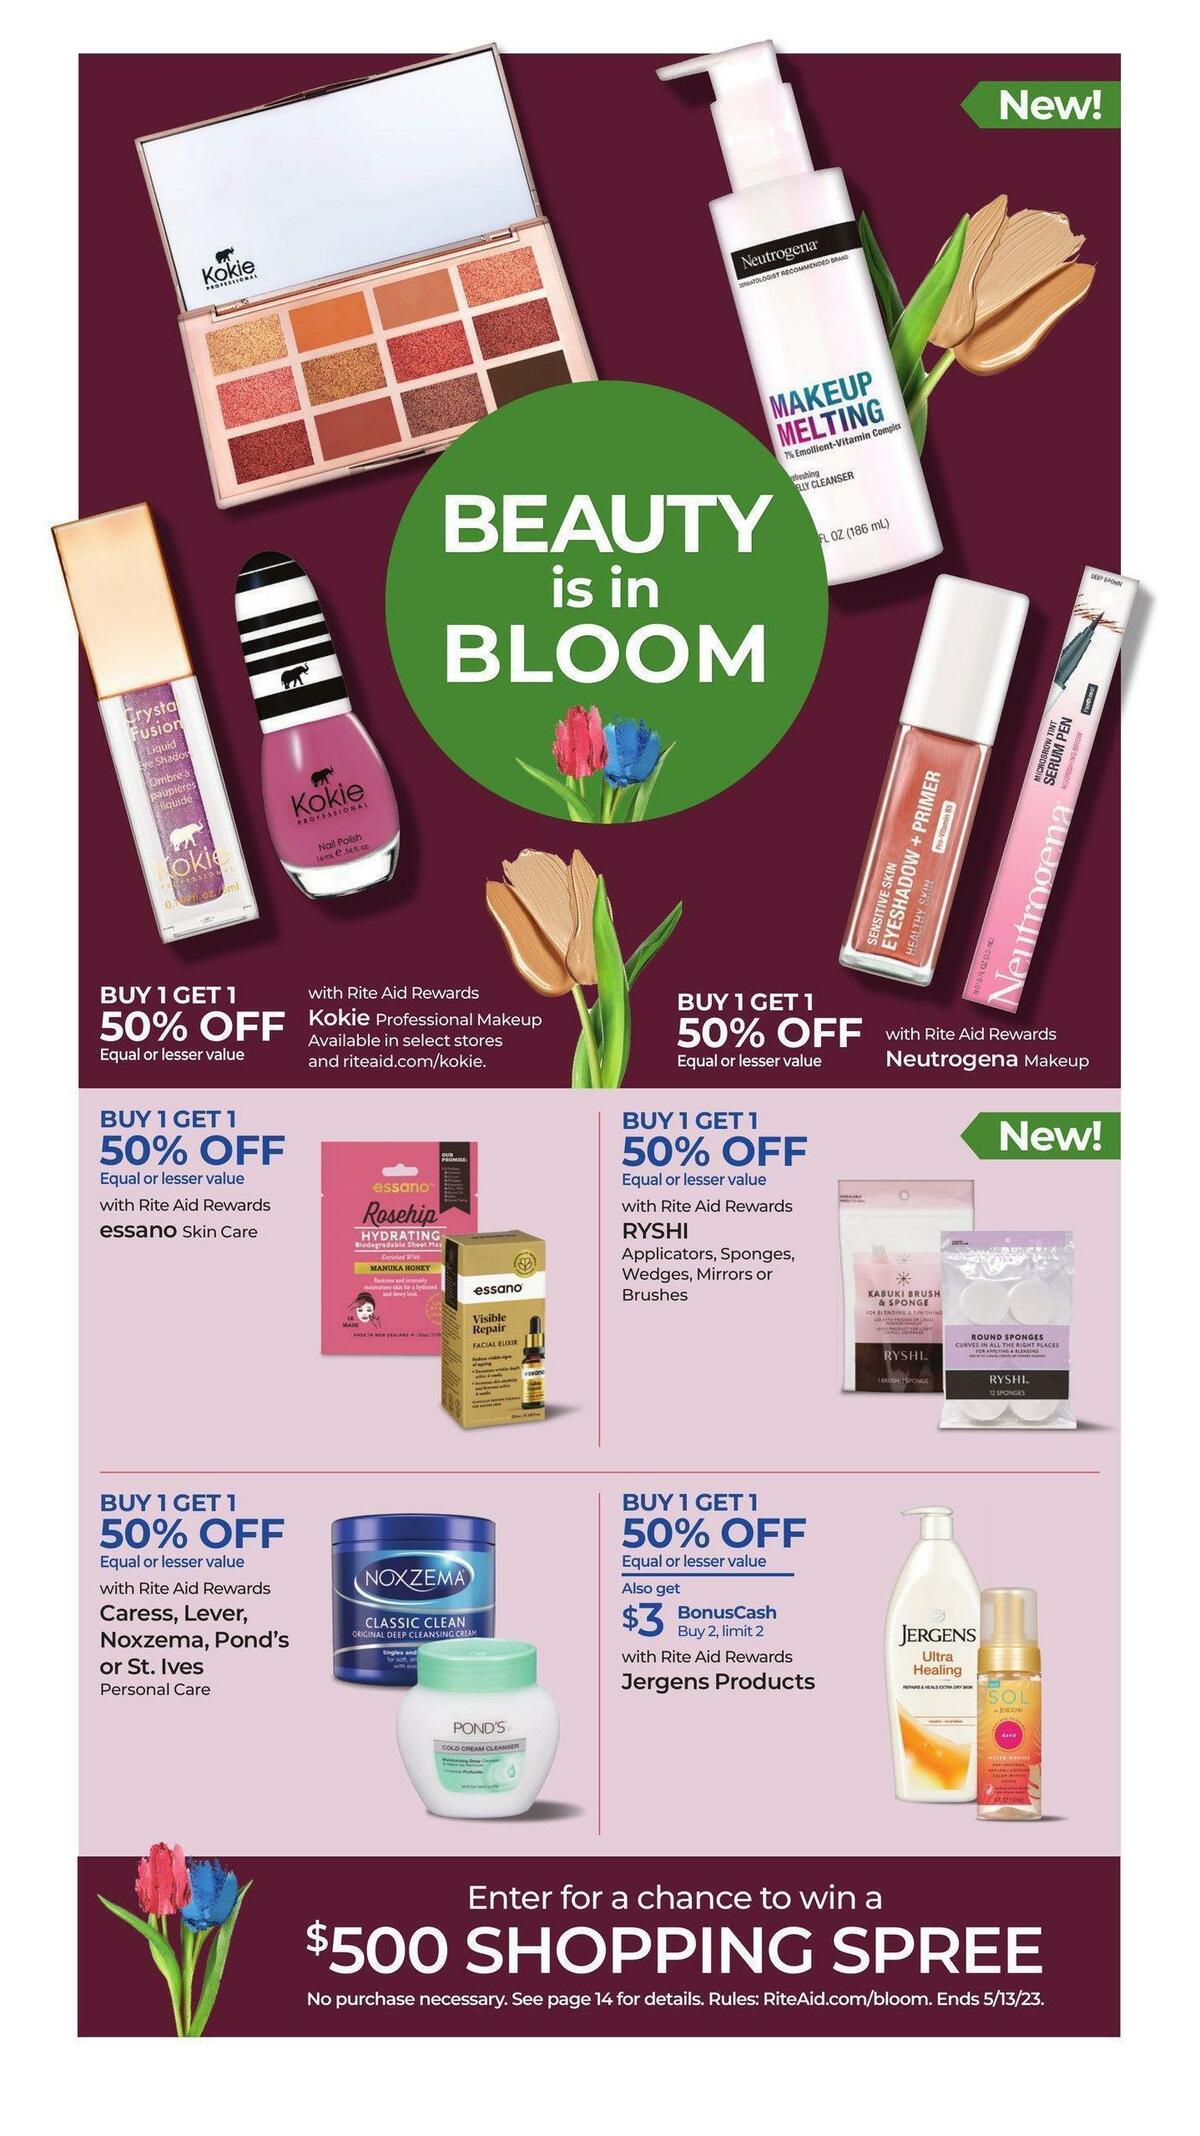 Rite Aid Weekly Ad from April 23